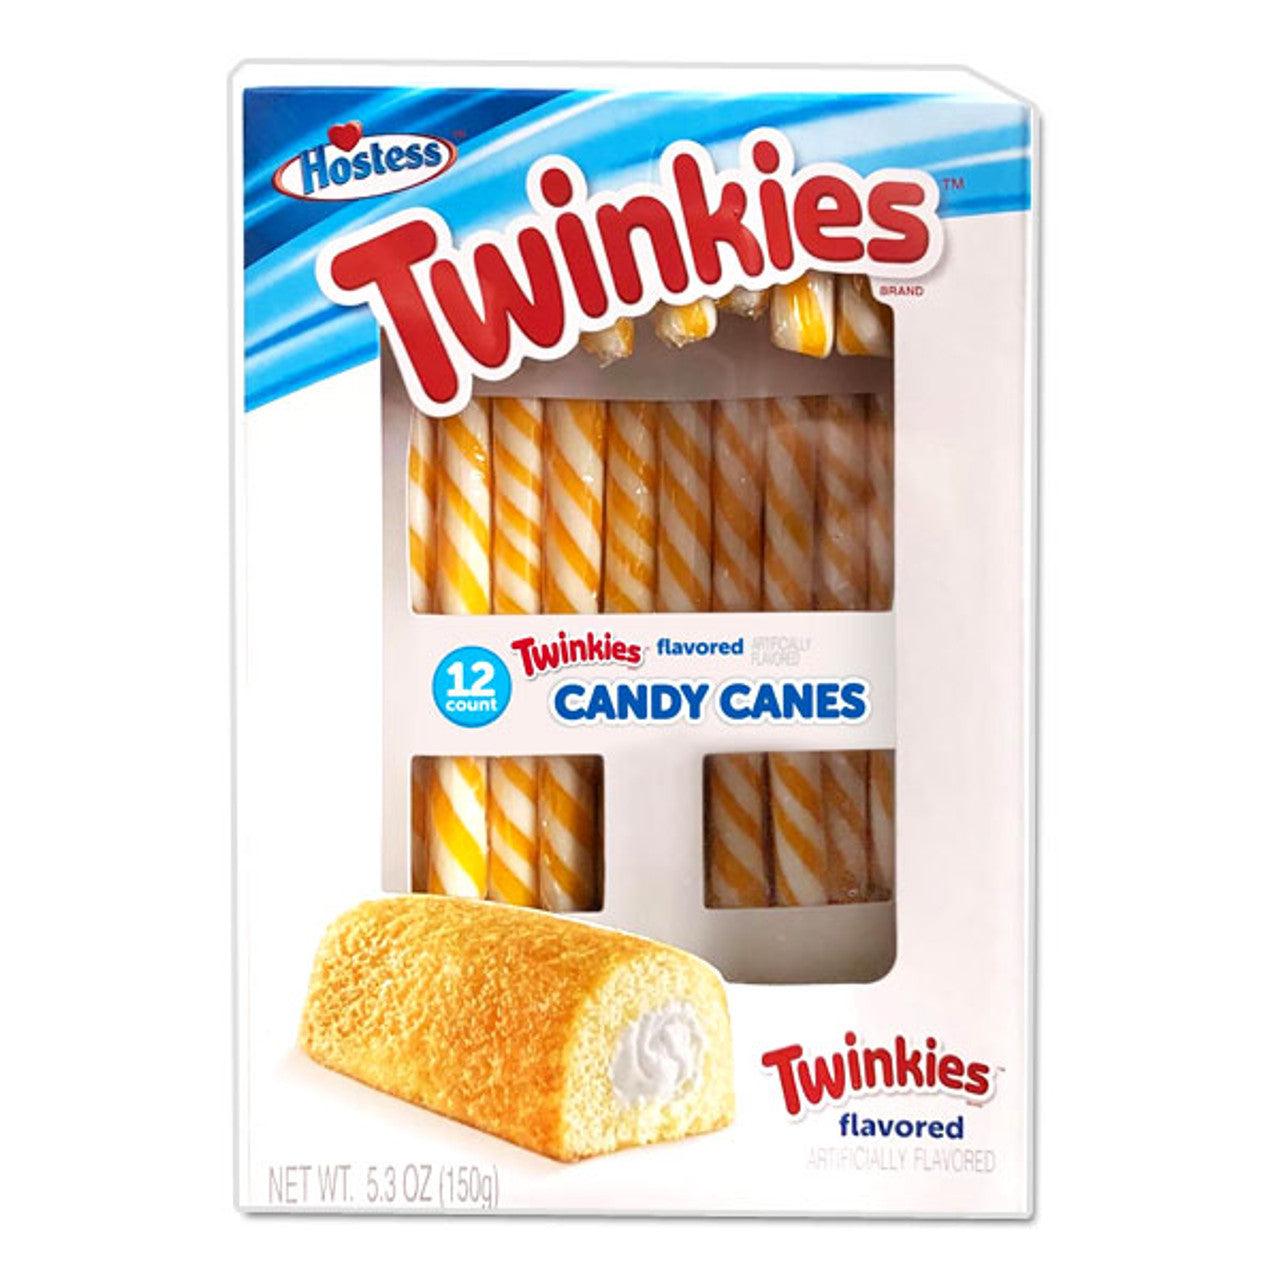 Hostess Twinkies Candy Canes 12 Count - Extreme Snacks